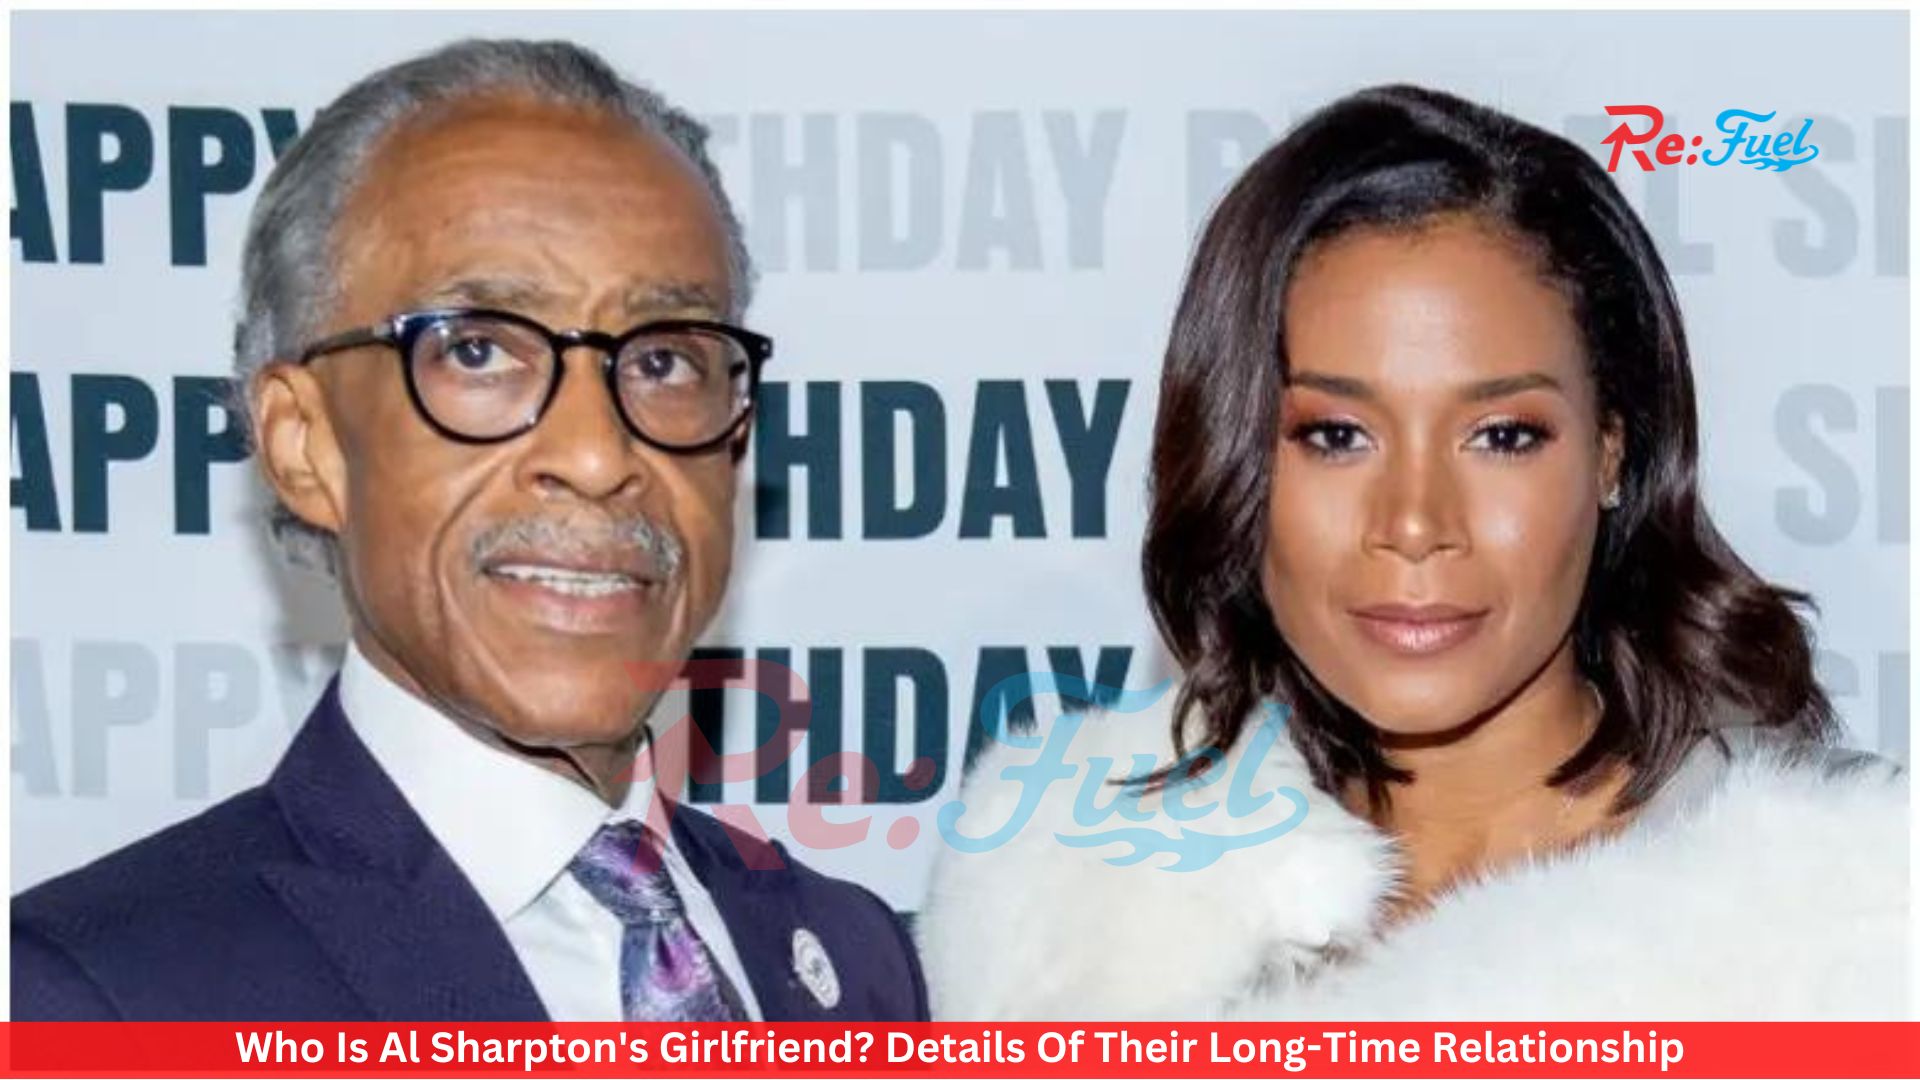 Who Is Al Sharpton's Girlfriend? Details Of Their Long-Time Relationship